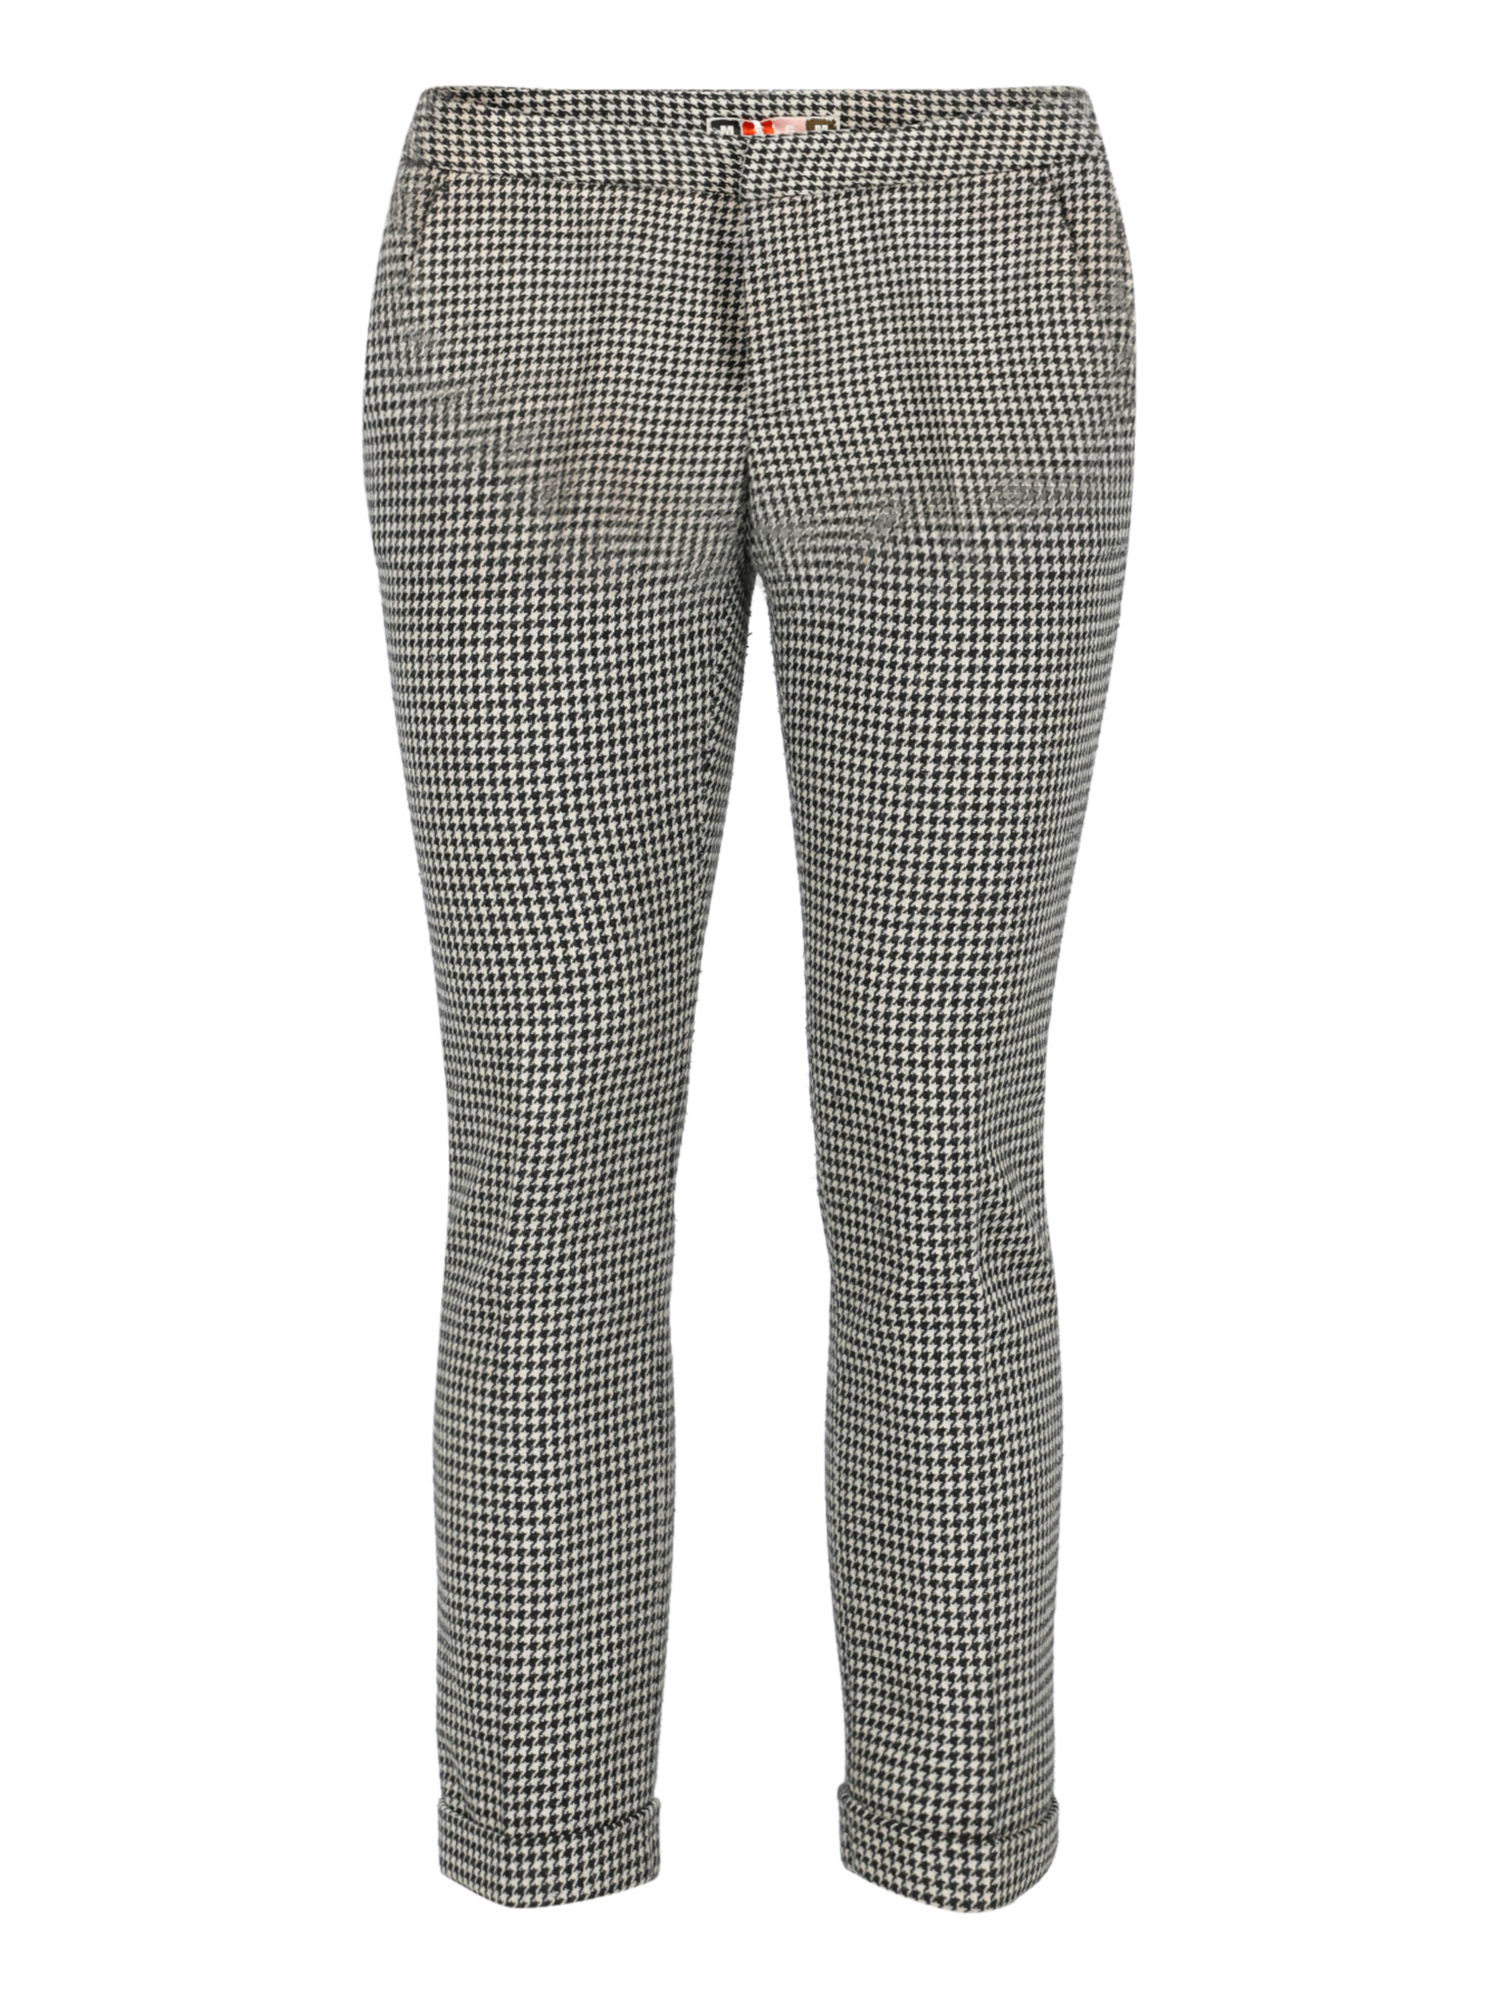 Condition: Good, Houndstooth Fabric, Color: Black, White - M -  -